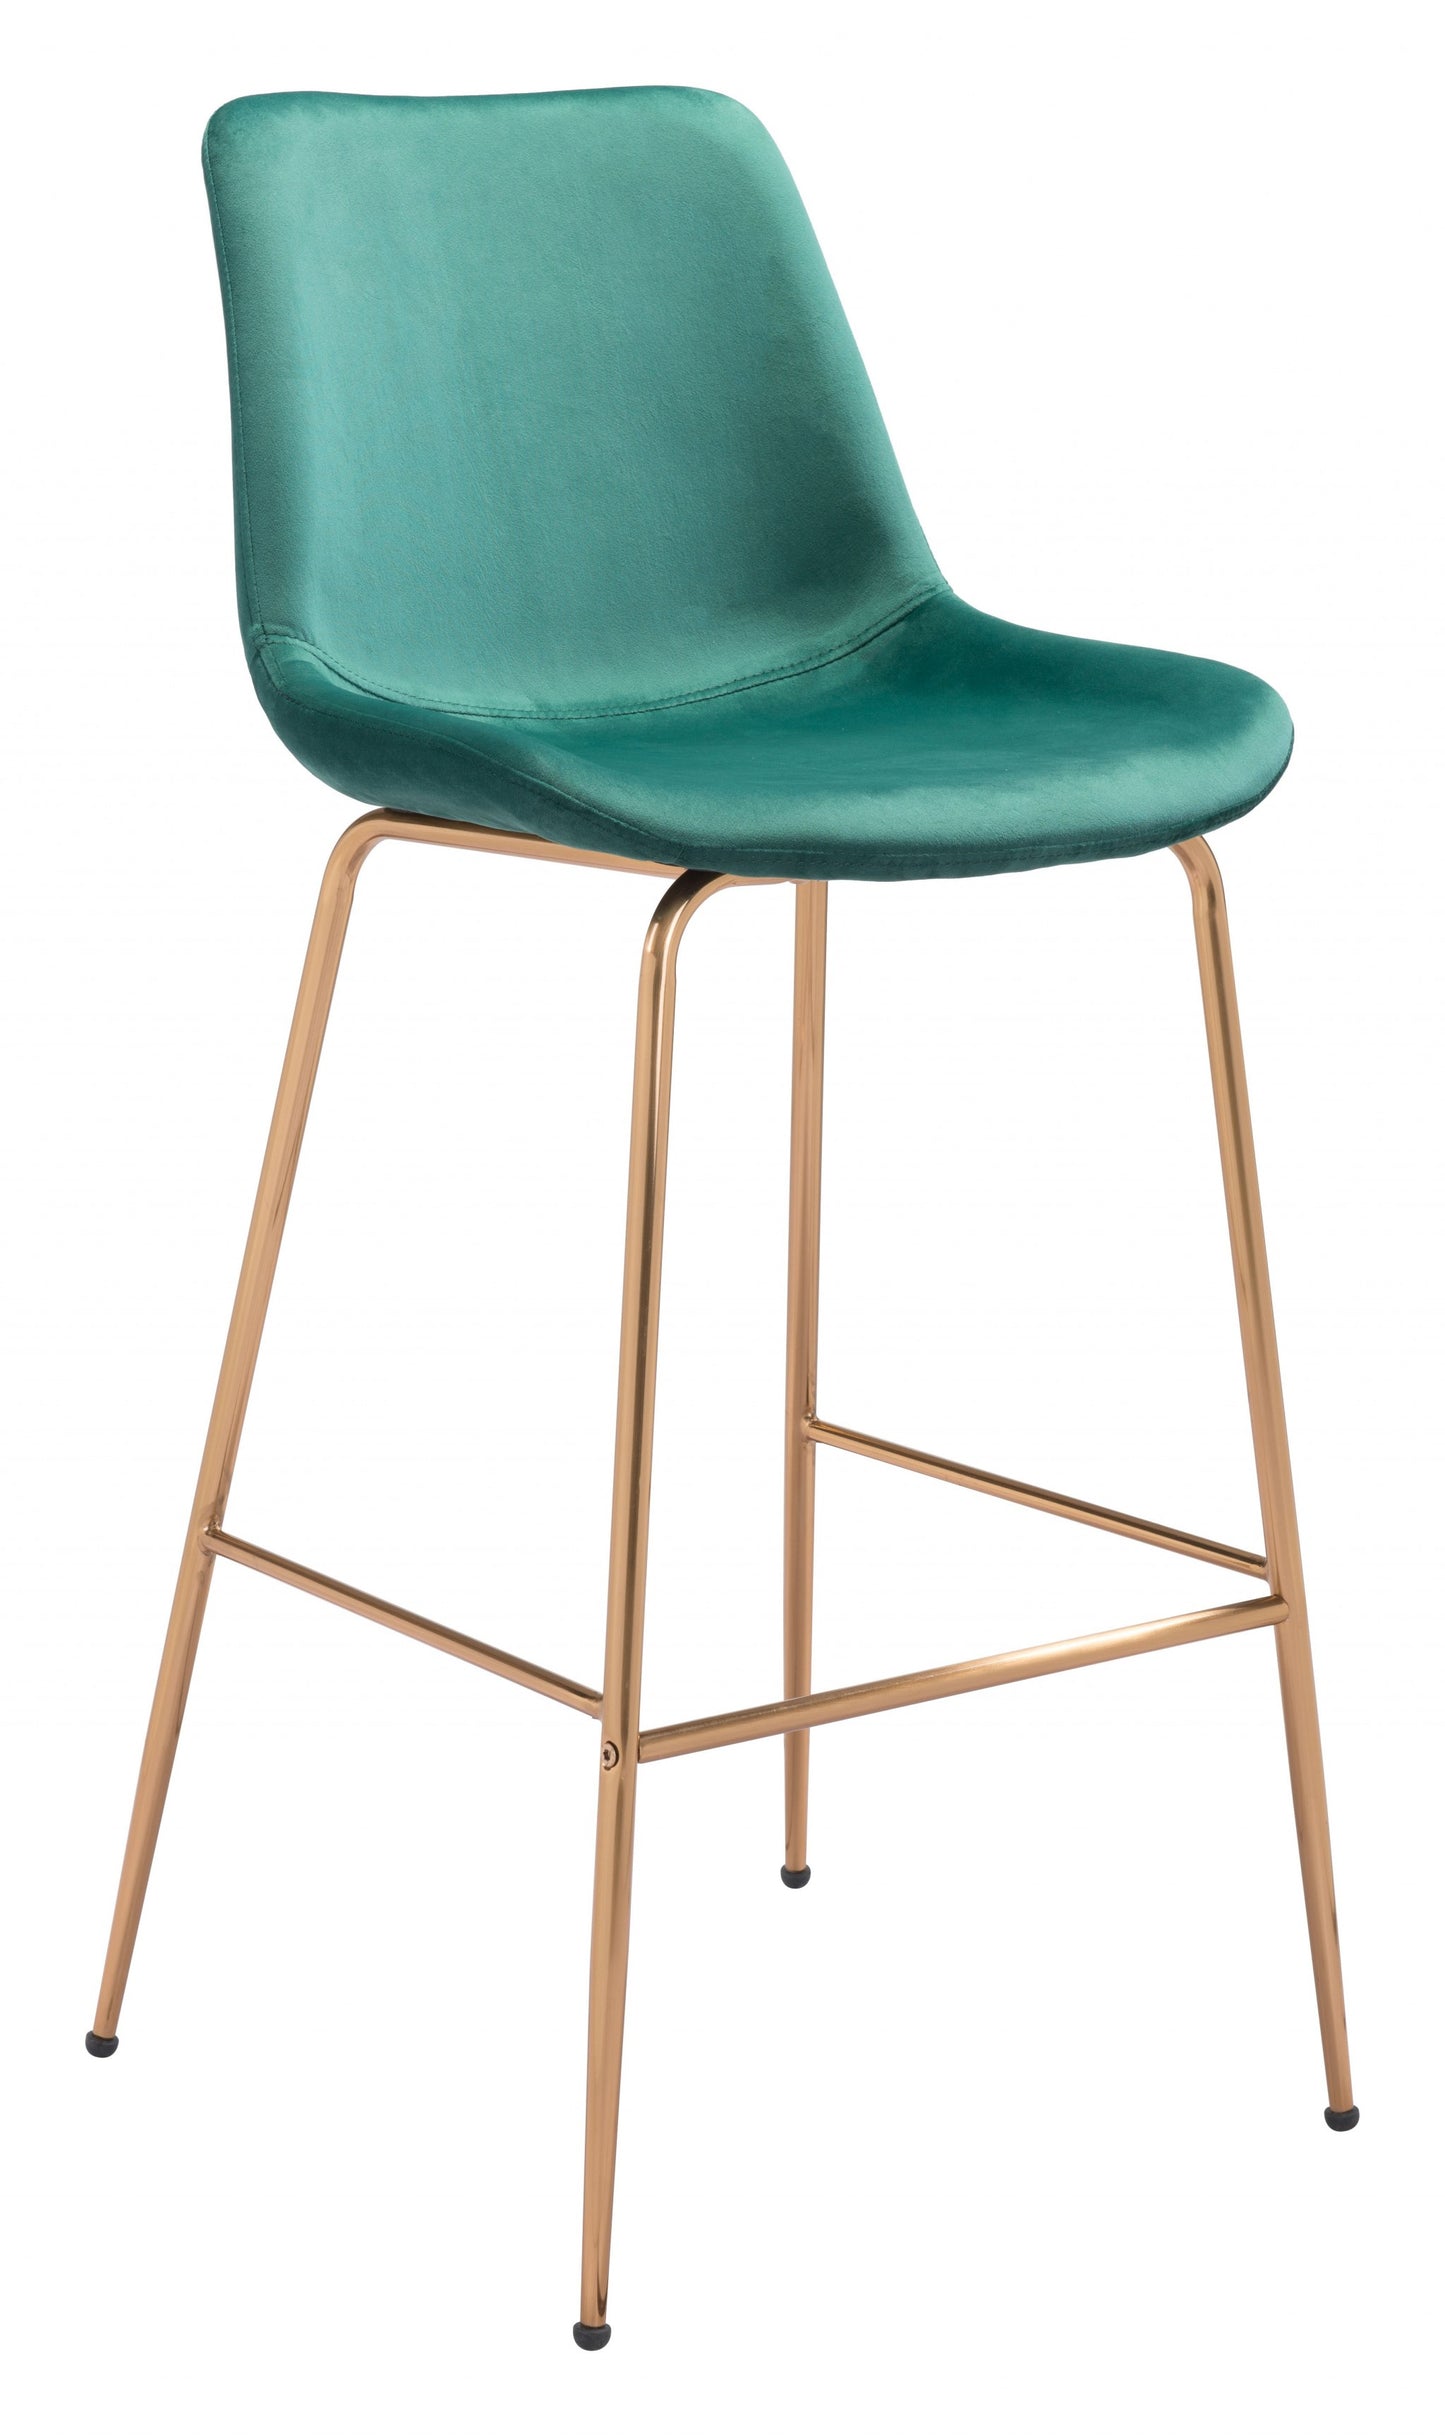 43" Green Steel Low Back Chair With Footrest By Homeroots